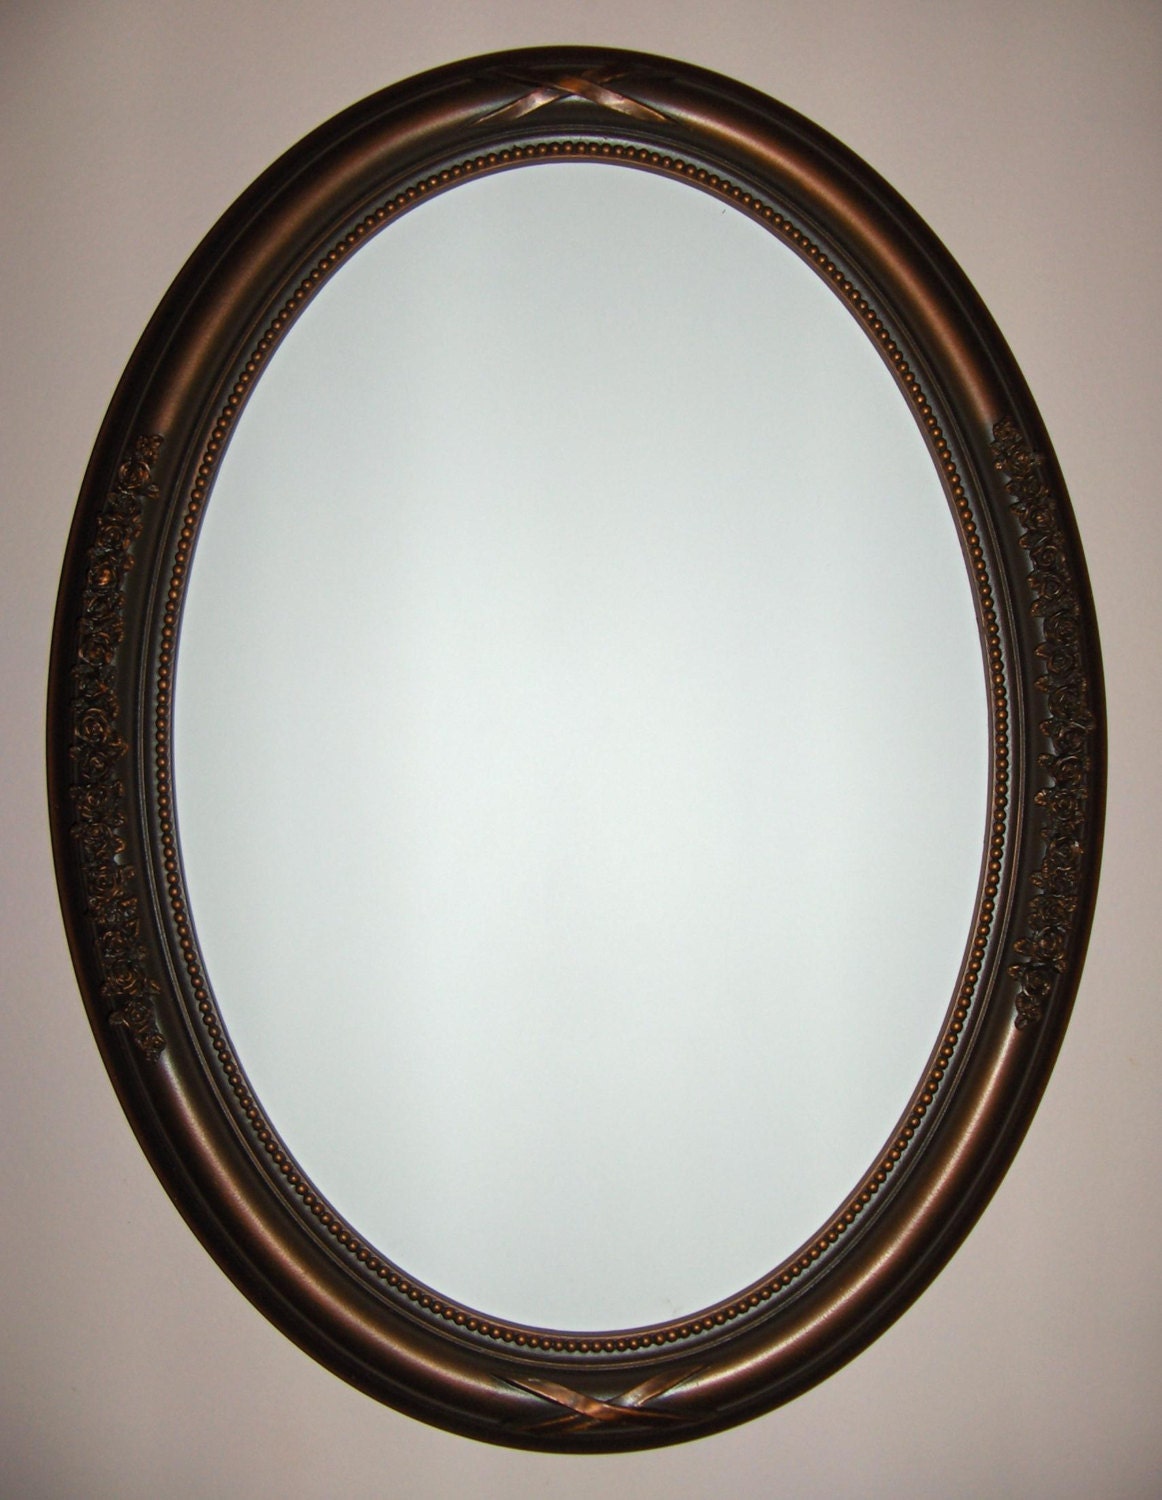 Oval mirror with oil rubbed bronze color frame. bathroom